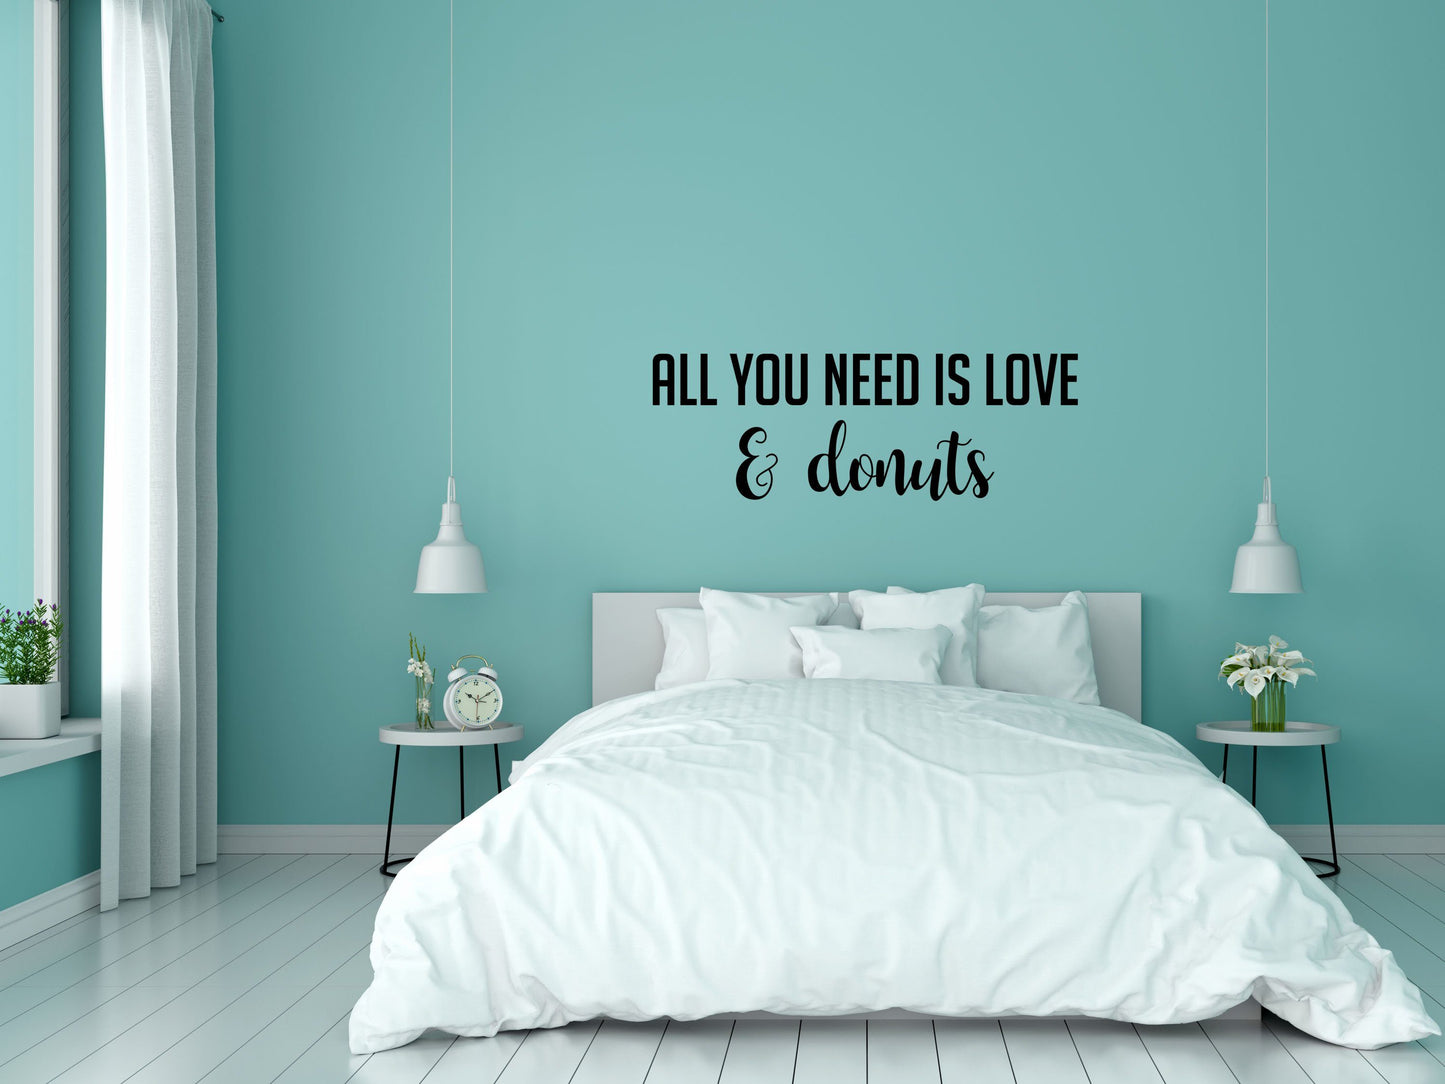 All You Need Is Love And Donuts Decal - Donuts Wall Art - Love and Donuts Wall Sign - Love Decor - Donut Wall Art Vinyl Wall Decal Done 